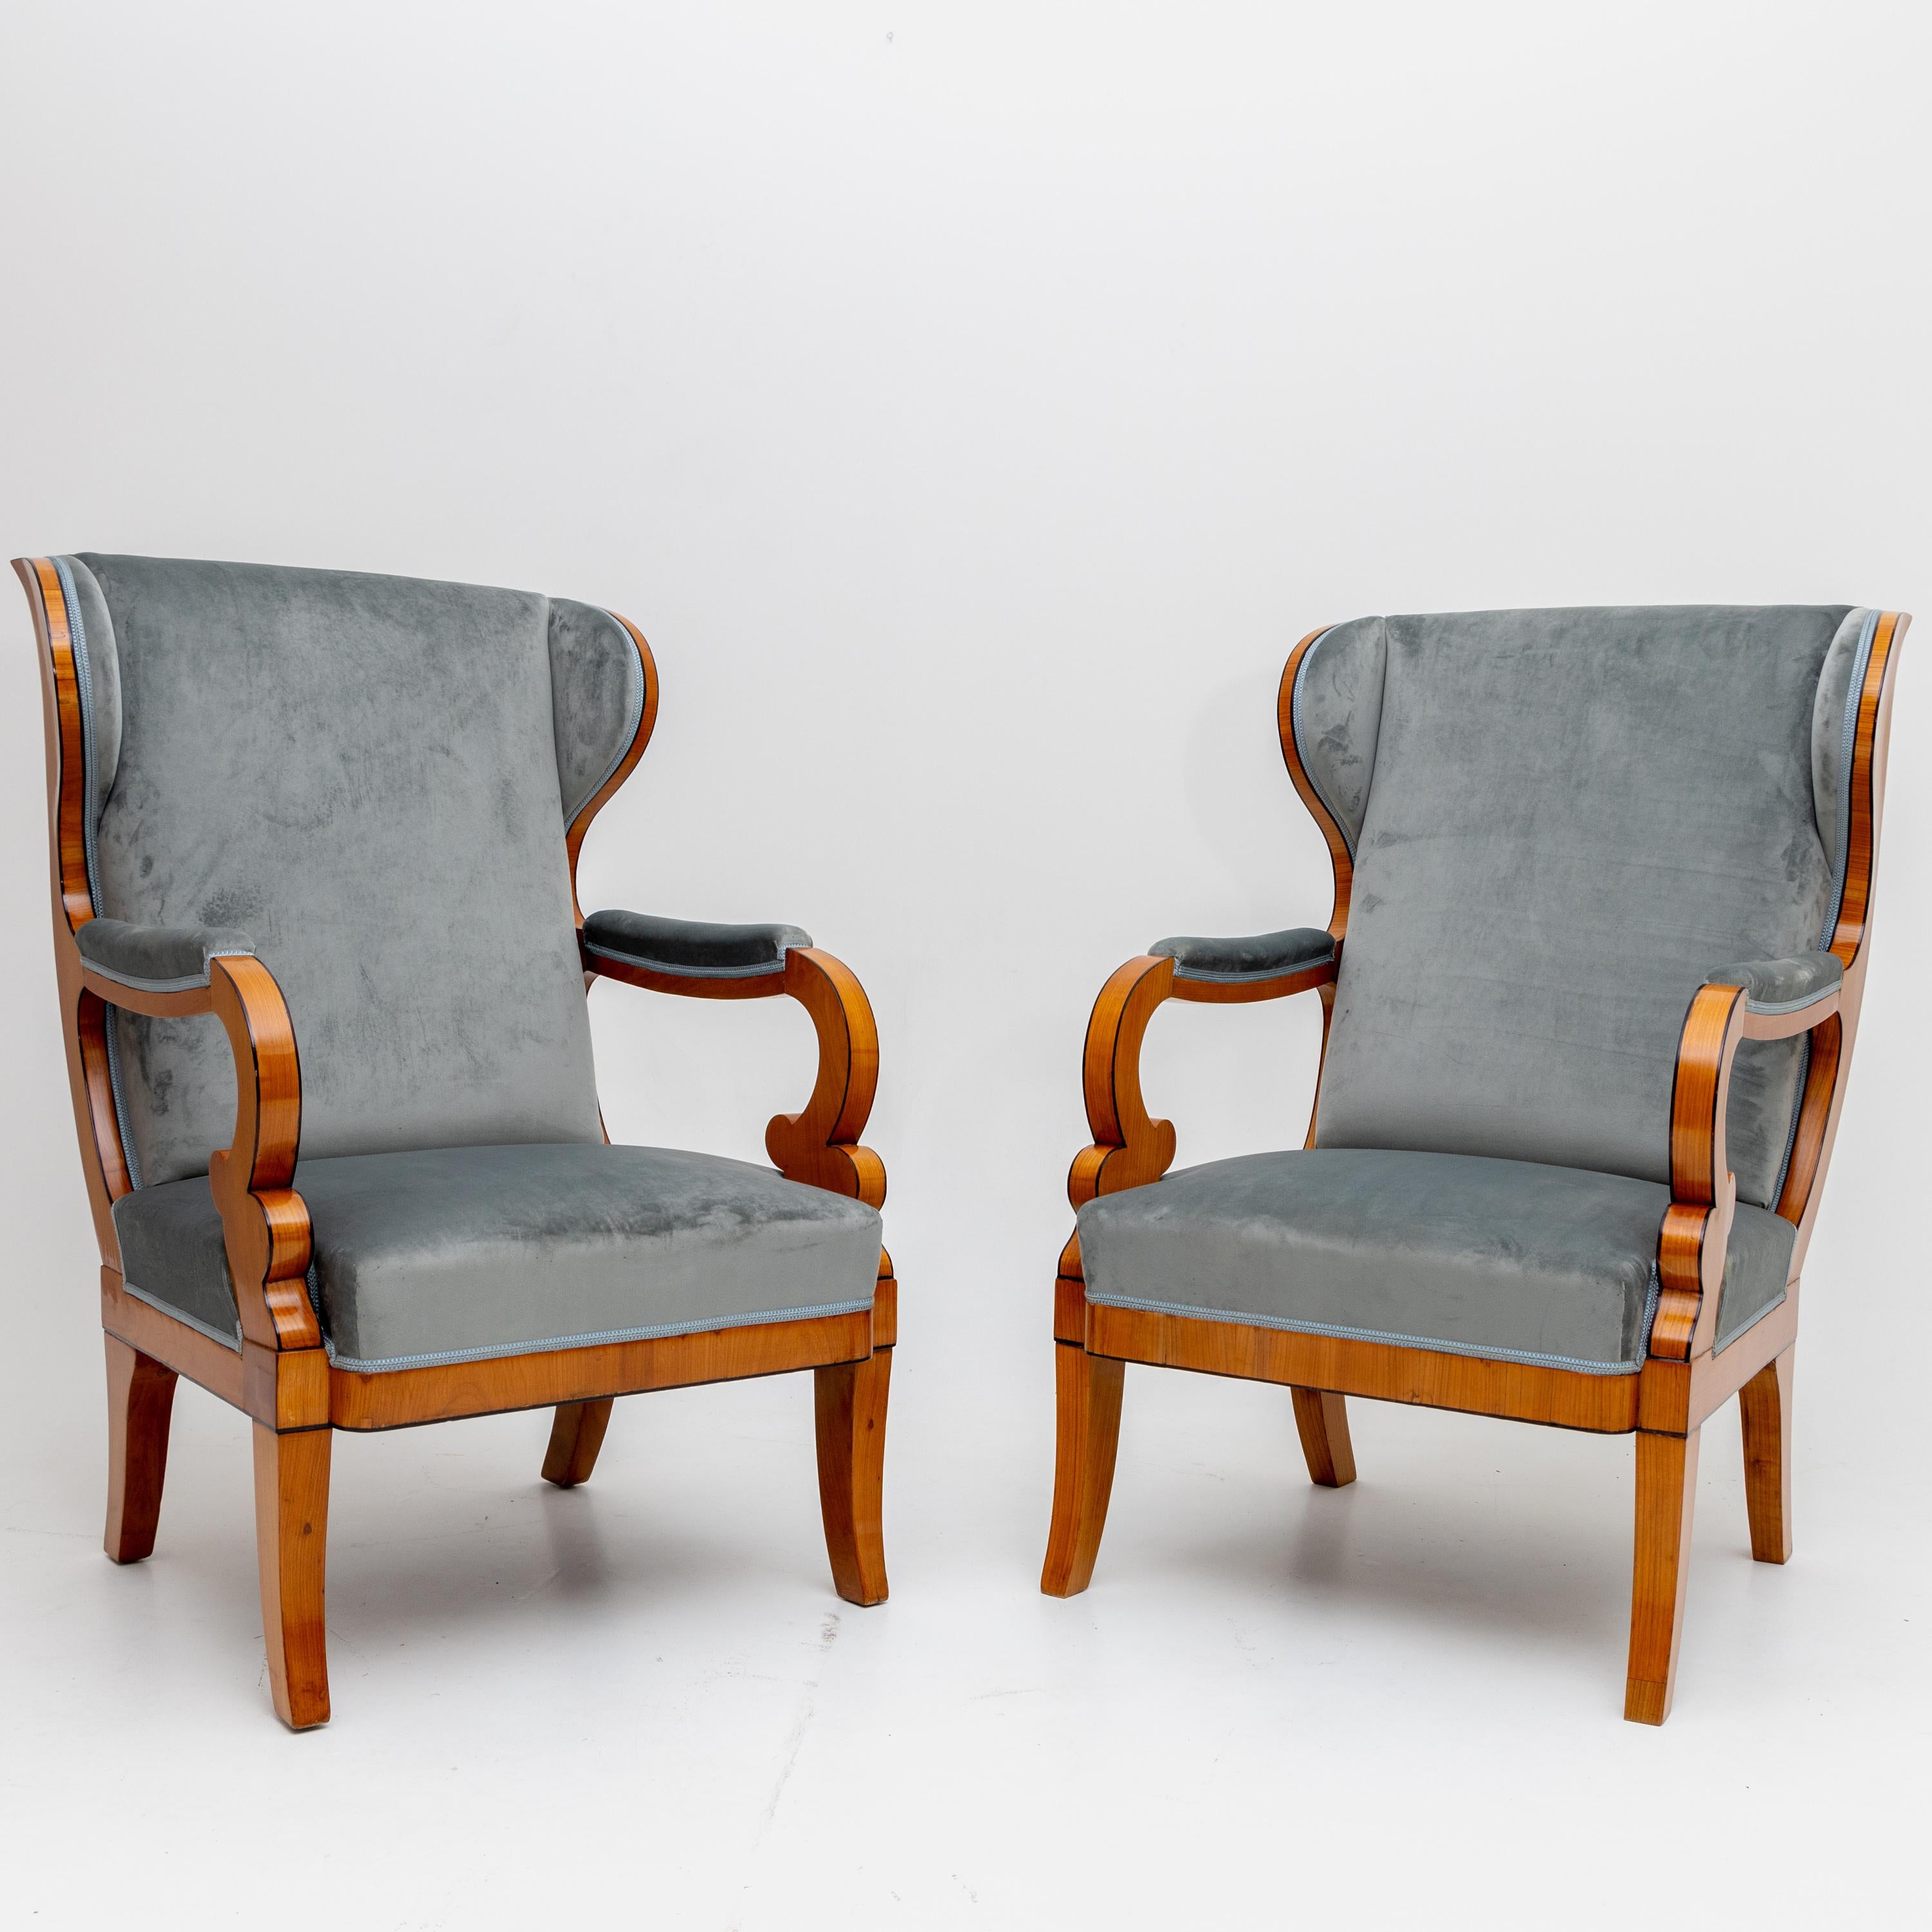 19th Century Pair of Wingback Chairs, c. 1830